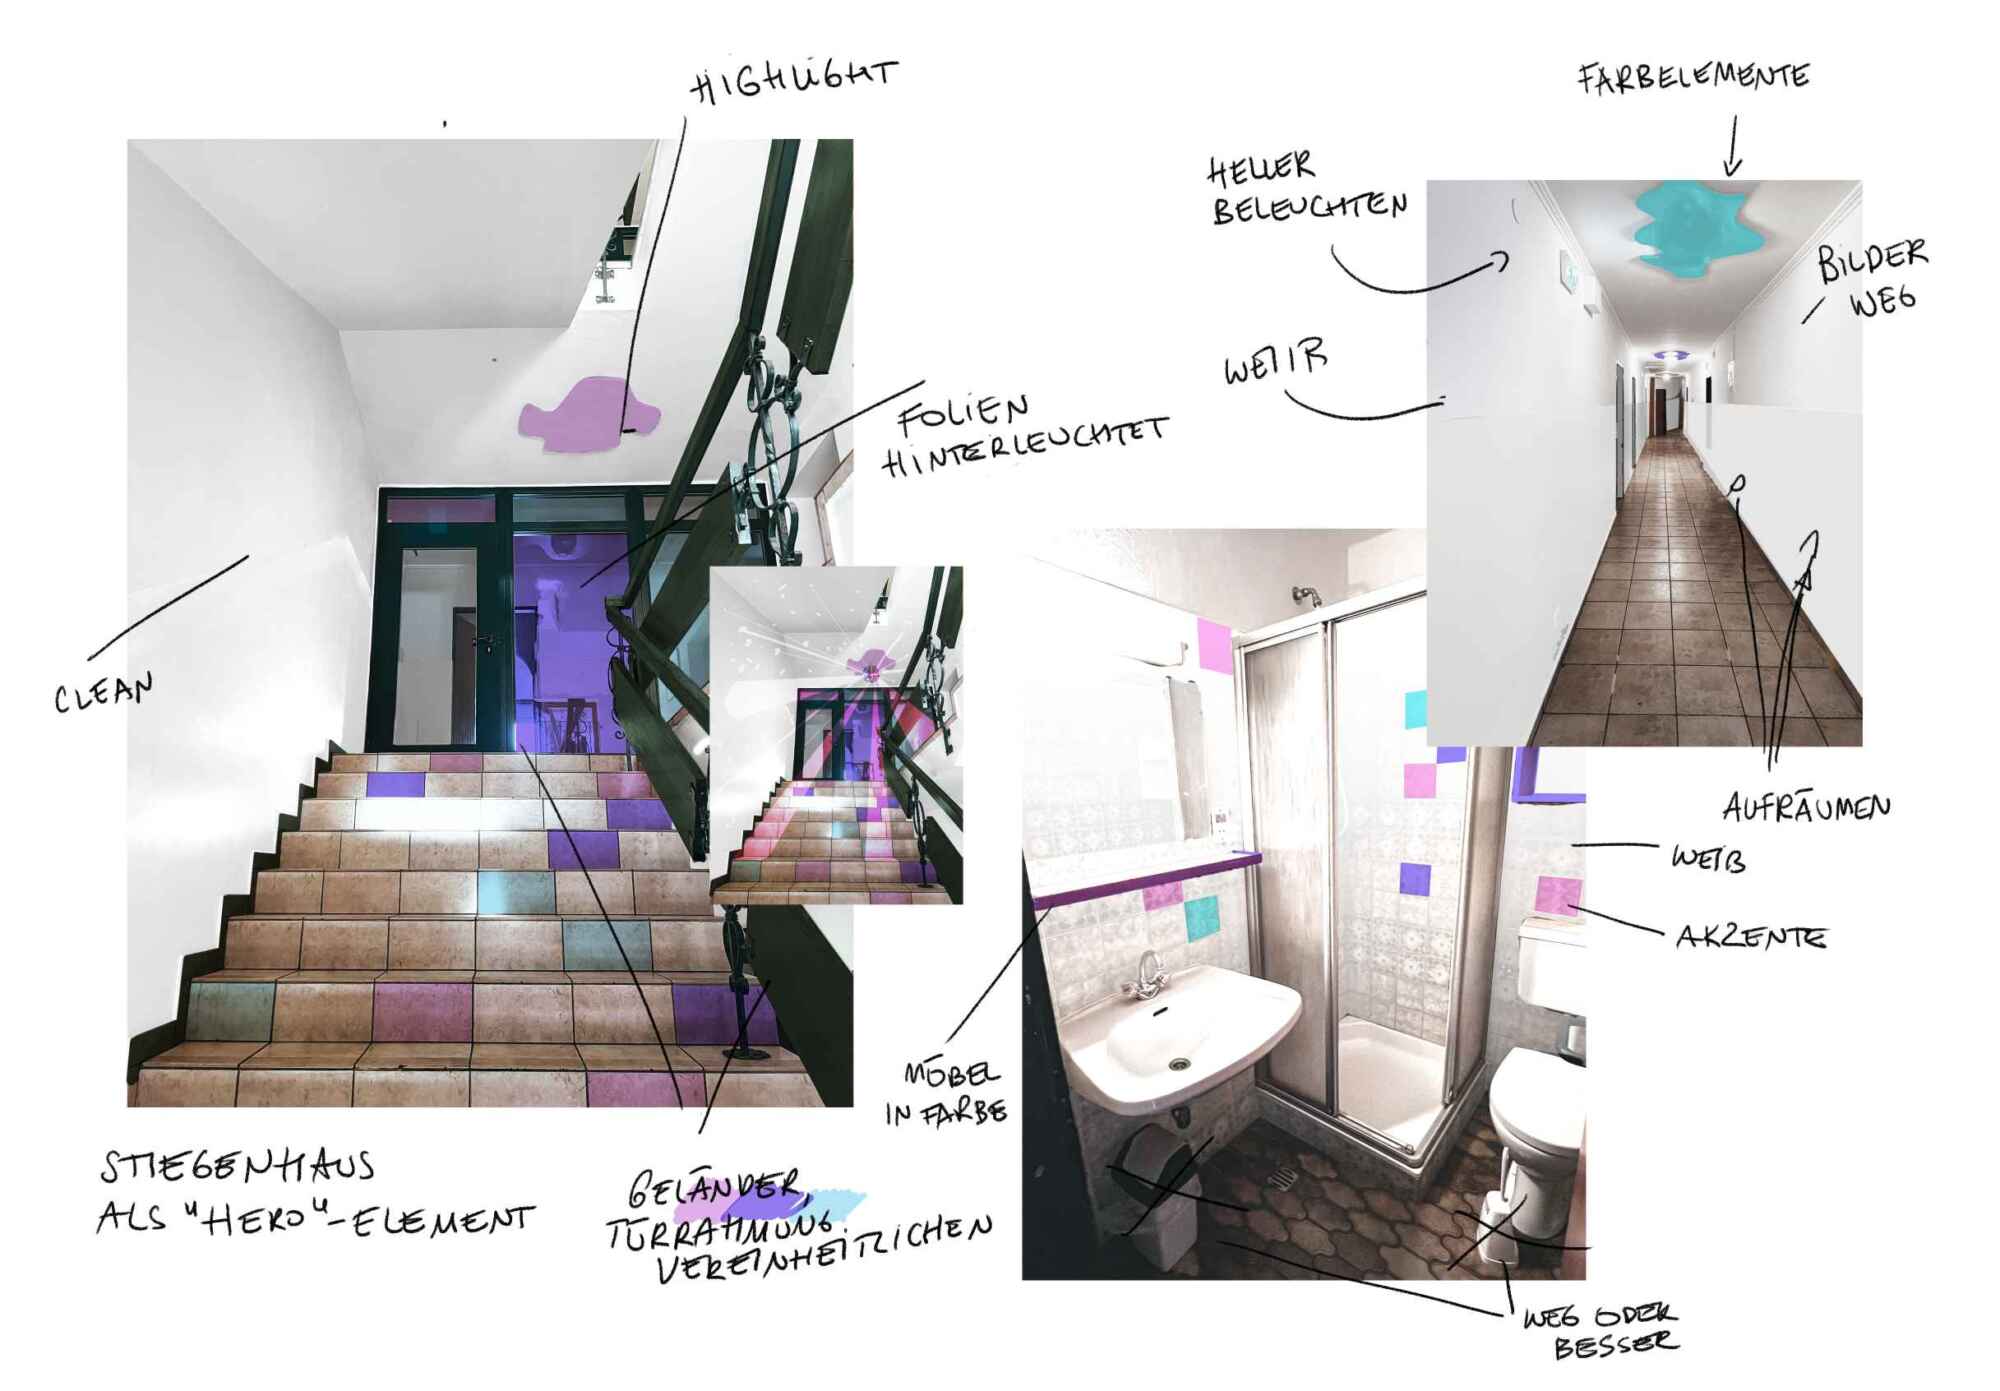 This picture shows the design concept for the Carinth Youth Hotel.